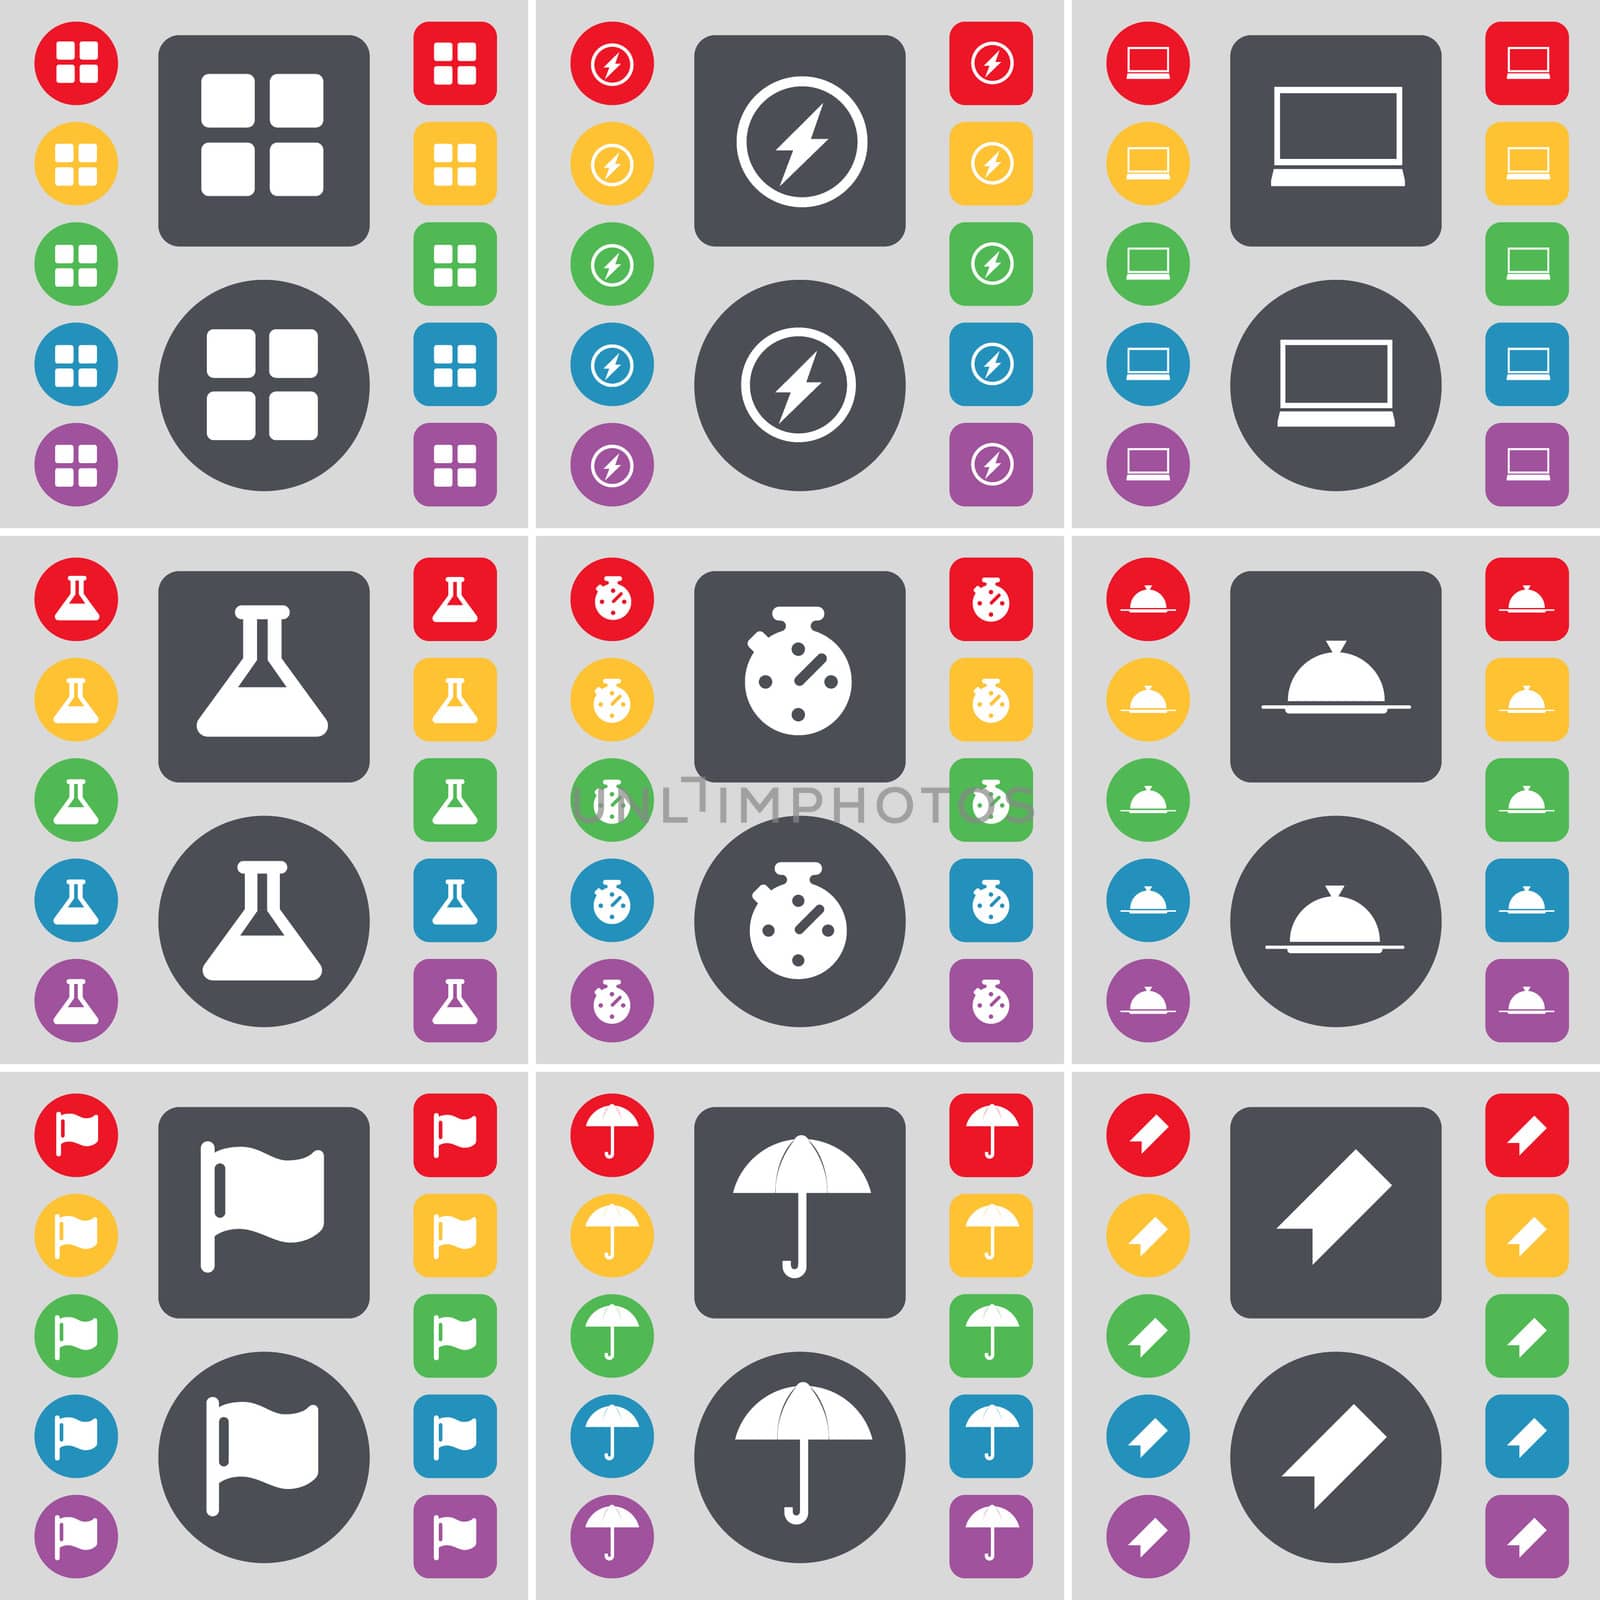 Apps, Flash, Laptop, Flask, Stopwatch, Tray, Flag, Umbrella, Marker icon symbol. A large set of flat, colored buttons for your design. illustration